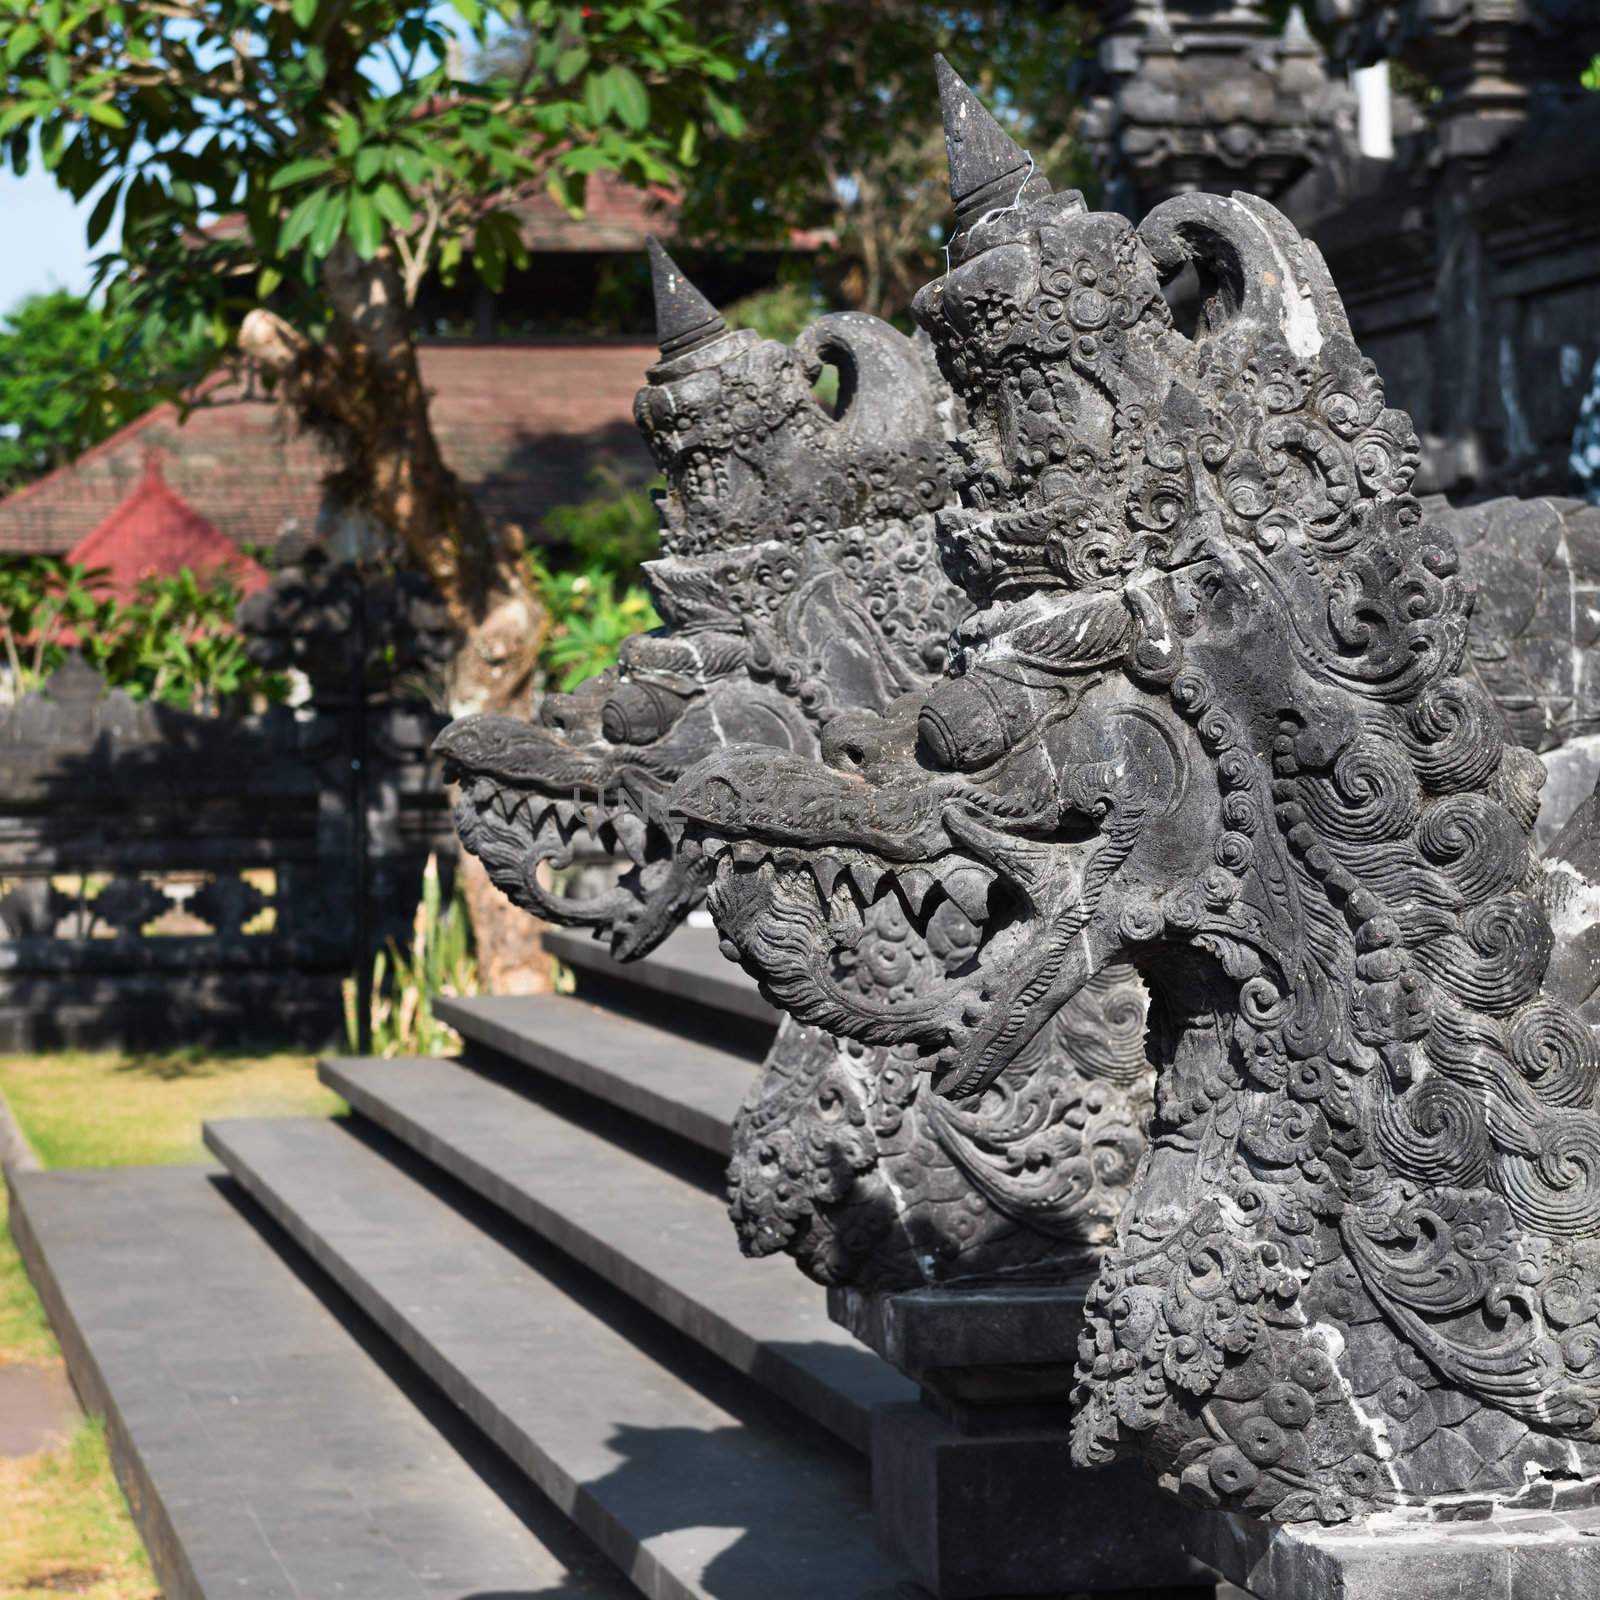 Traditional Balinese stone dragon image in the temple by iryna_rasko